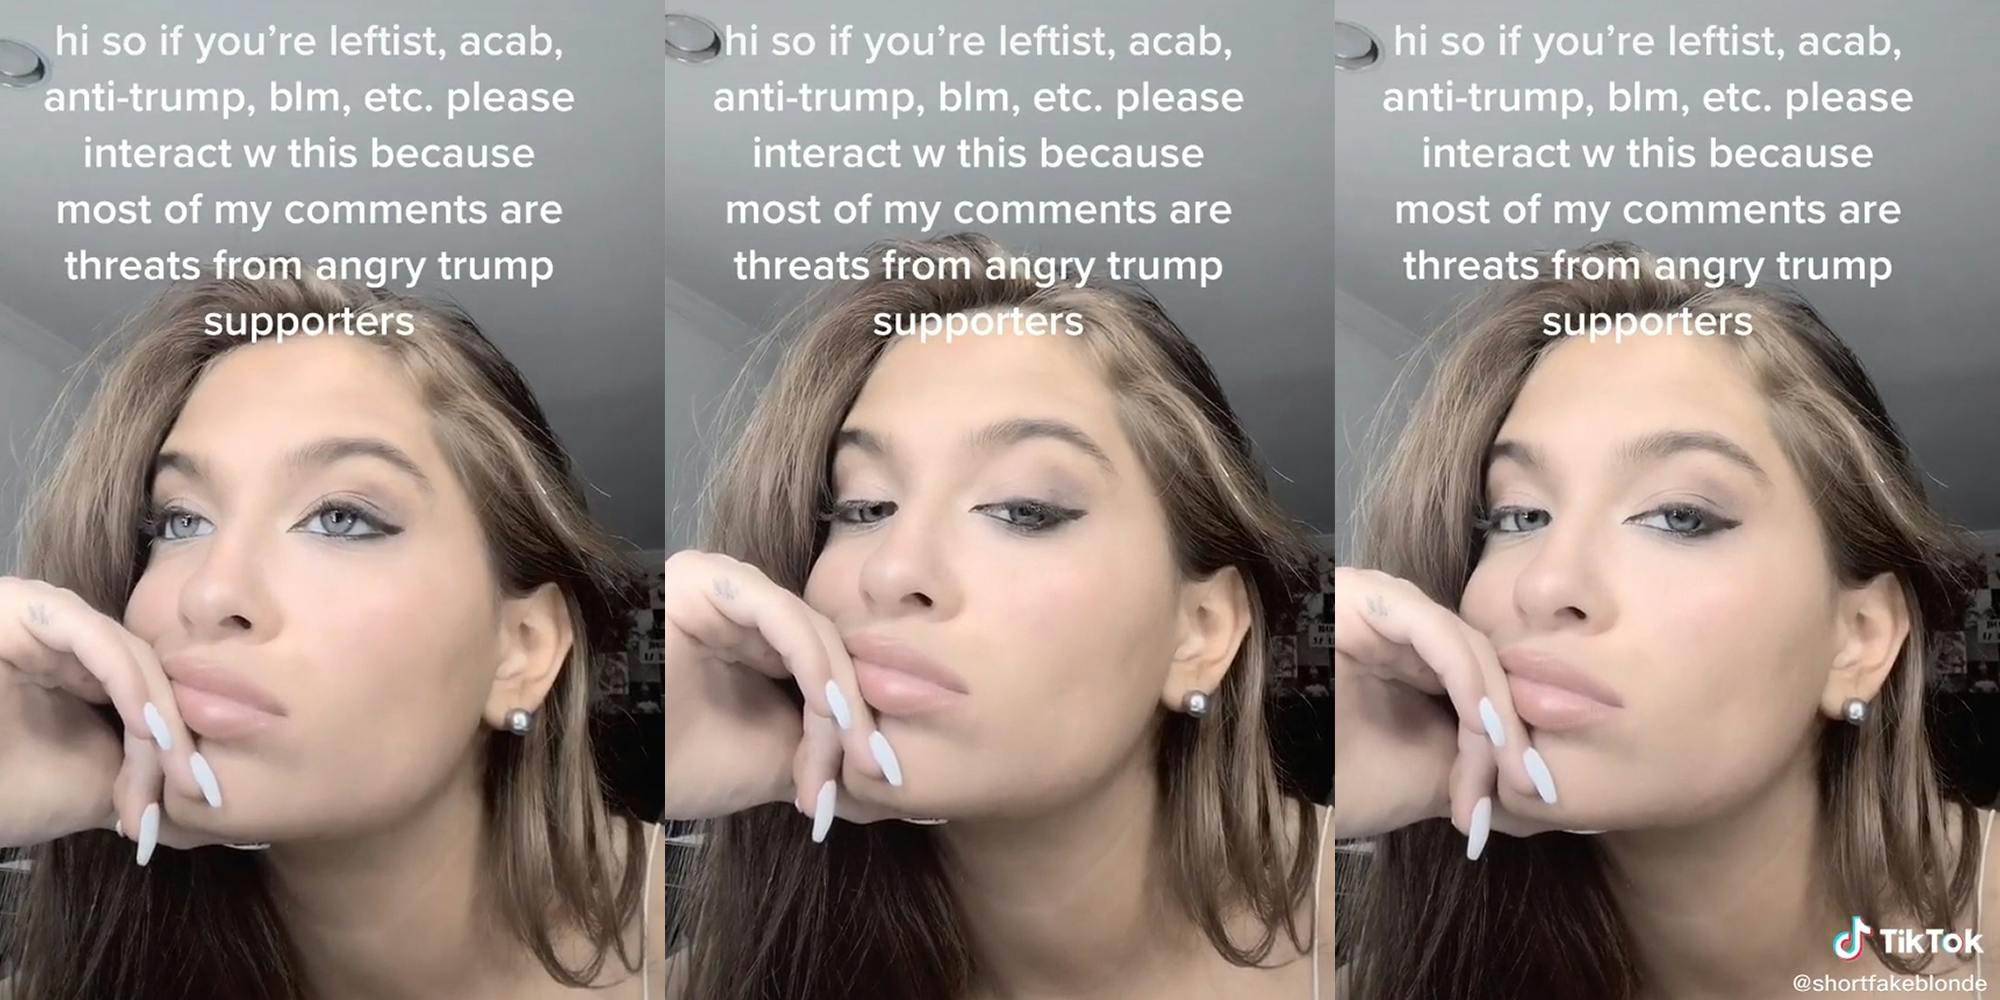 claudia conway with "hi so if you're leftist, acab, anti-trump, blm, etc. please interact w this because most of my comments are threats from angry trump supporters" tiktok